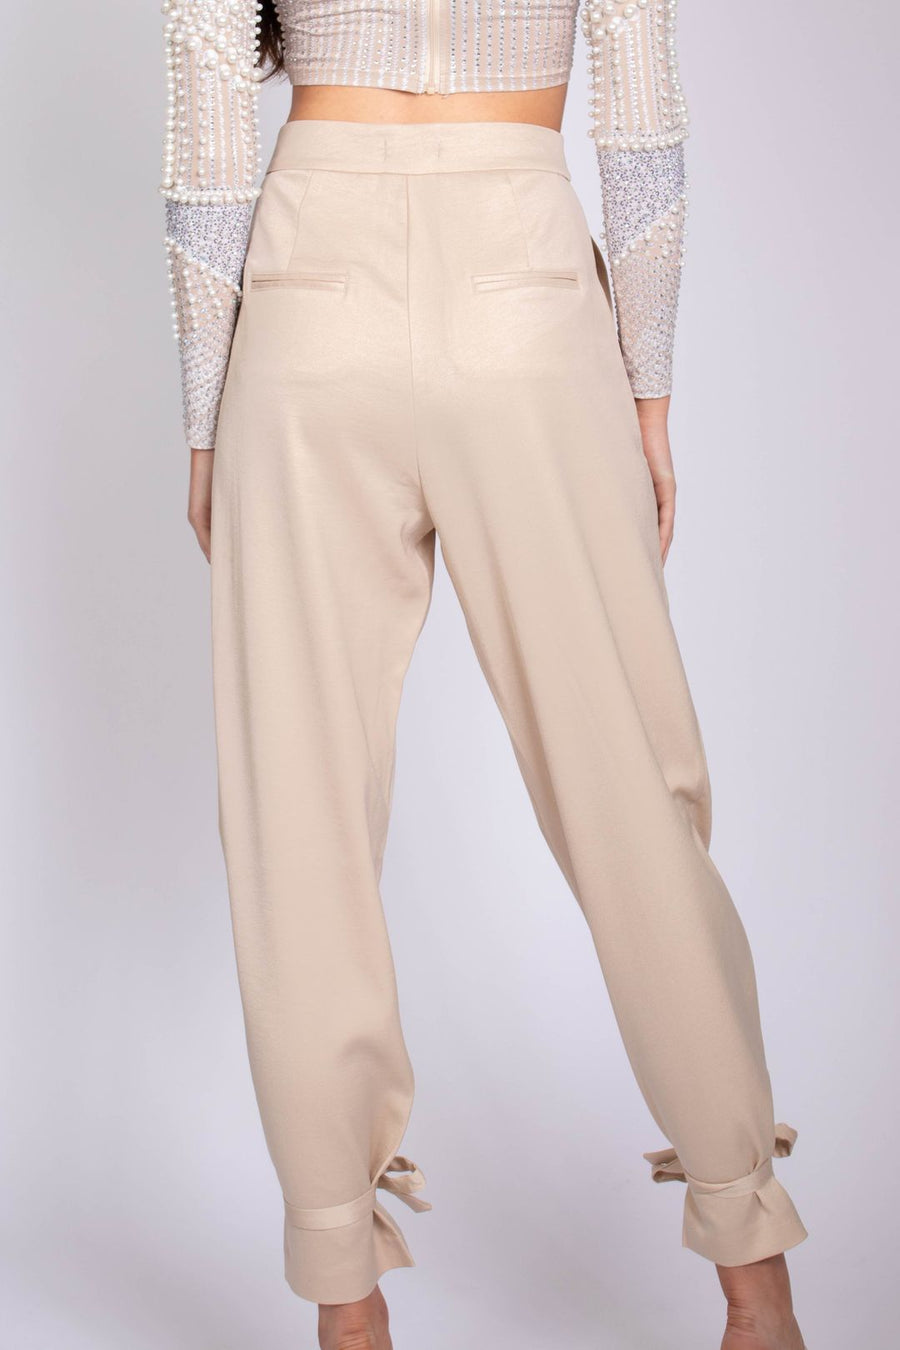 Buy Beige Ankle Pant Cotton Silk for Best Price, Reviews, Free Shipping